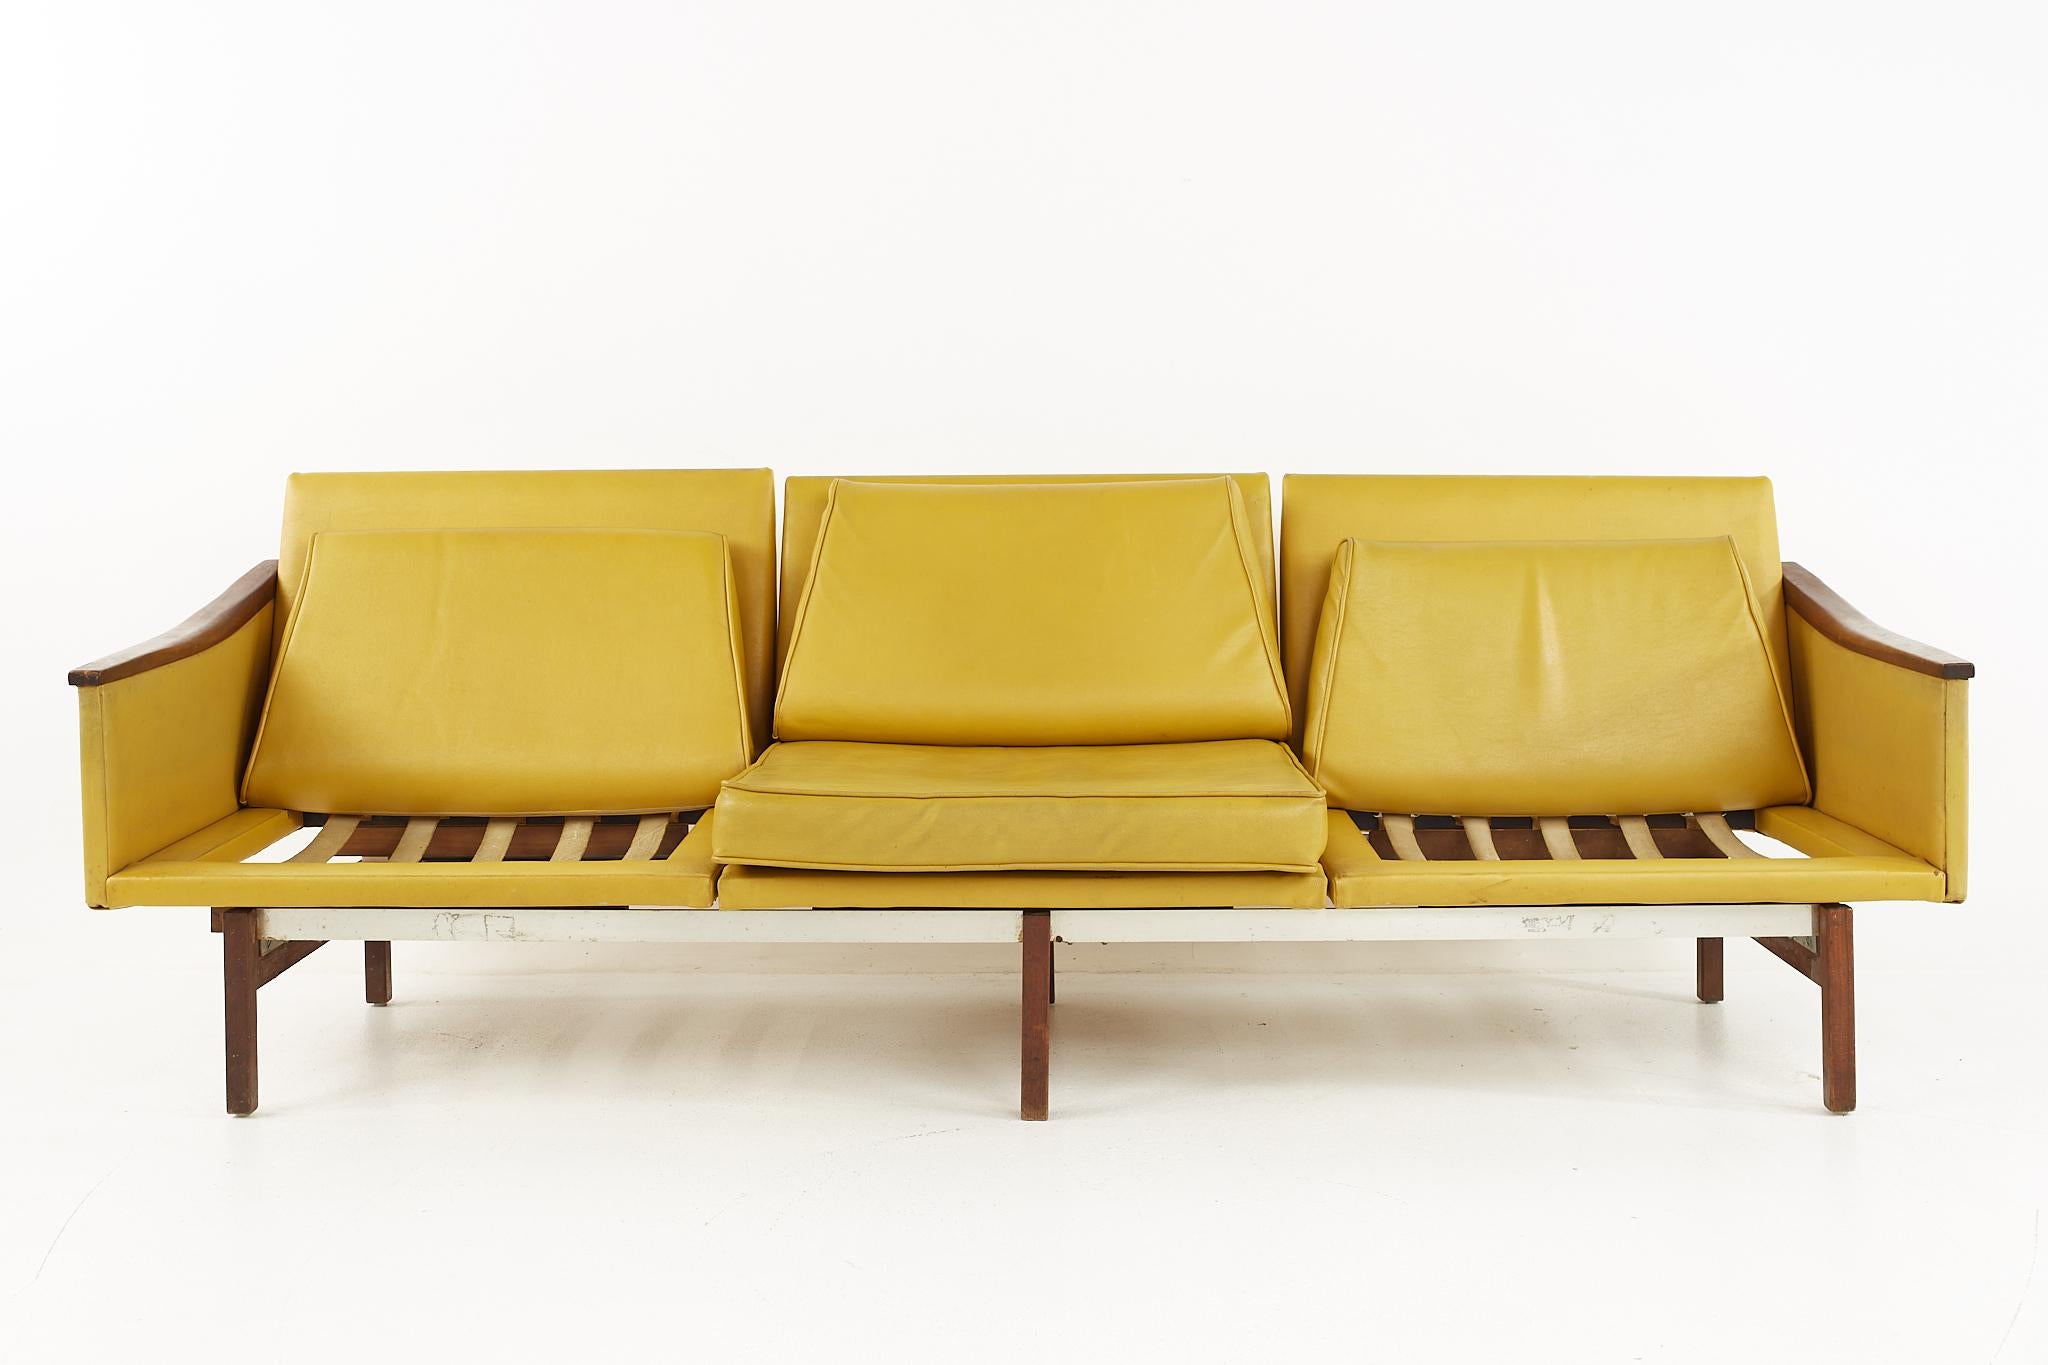 Arthur Umanoff mid century 3 seat sofa 

This sofa measures: 91 wide x 29 deep x 29.5 inches high, with a seat height of 15.5 and arm height of 21.25 inches

All pieces of furniture can be had in what we call restored vintage condition. That